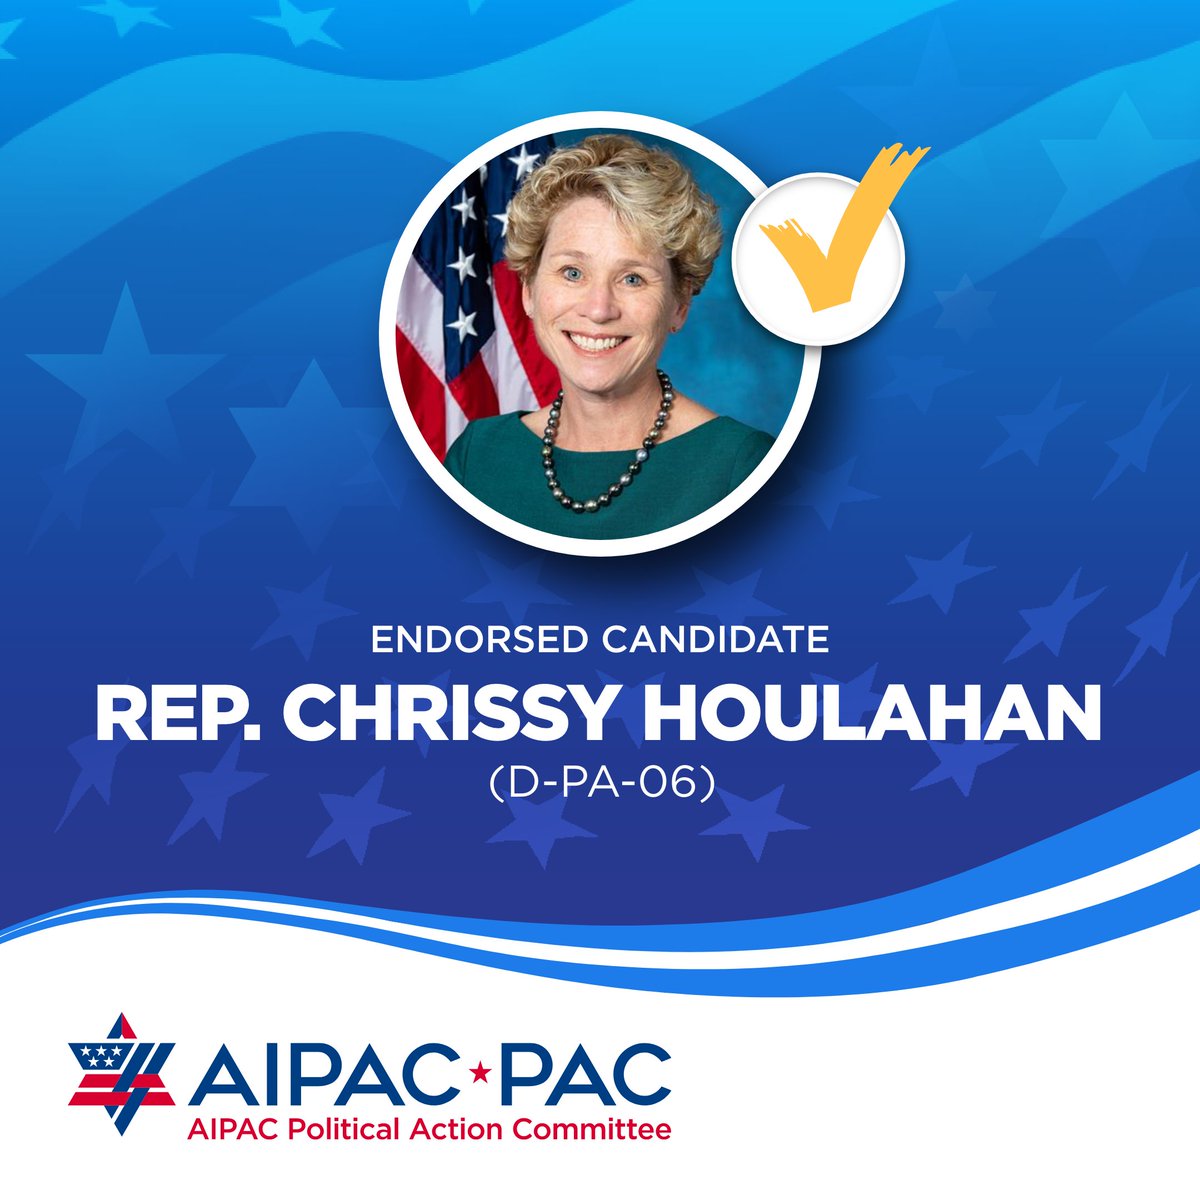 Congratulations to AIPAC-endorsed @RepHoulahan and @RepBrianFitz on your primary election victories! We are proud to support pro-Israel candidates who help strengthen and expand the U.S.-Israel relationship. Being pro-Israel is good policy and good politics.